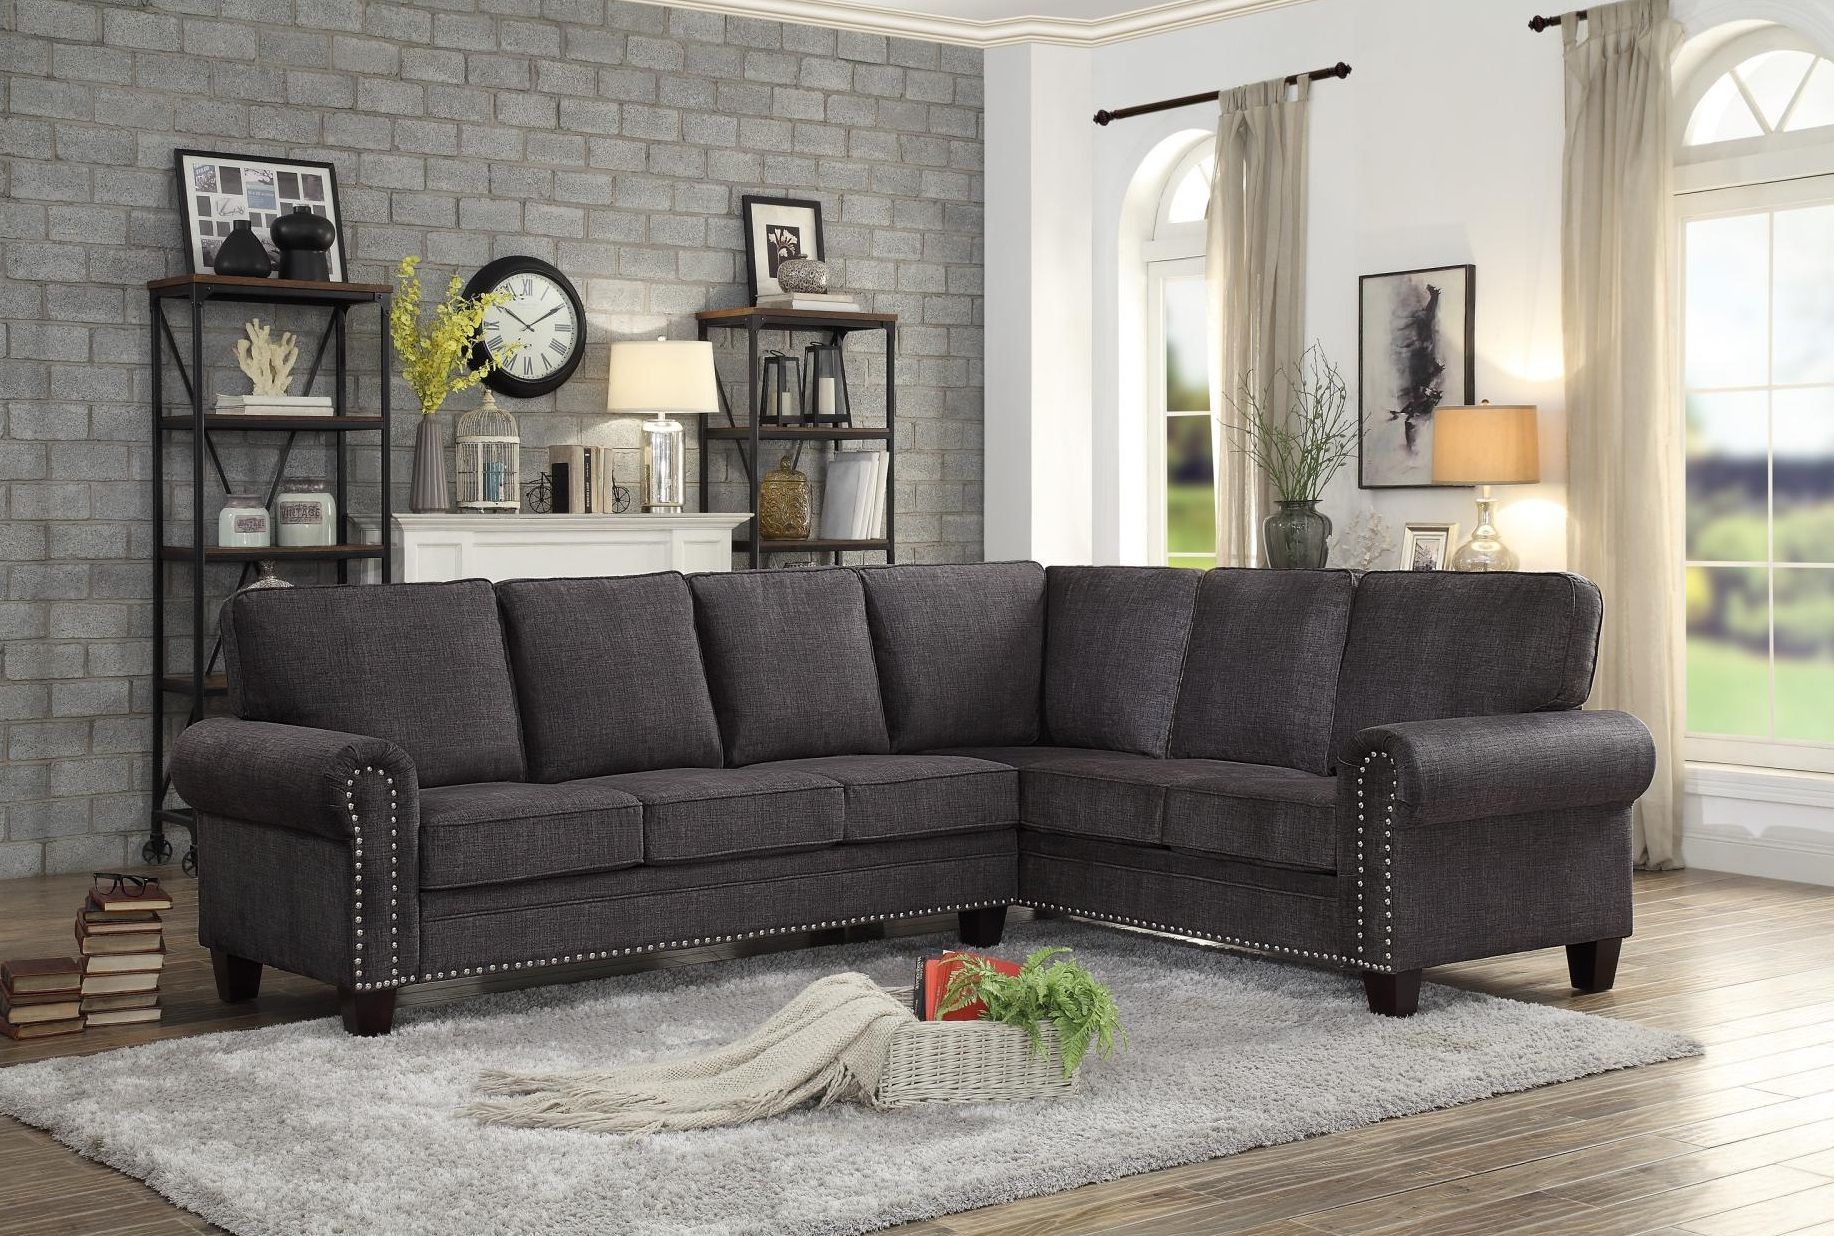 Cornelia Dark Grey Sectional (with Images) | Fabric Sectional Sofas With Regard To Dark Gray Sectional Sofas (View 13 of 20)